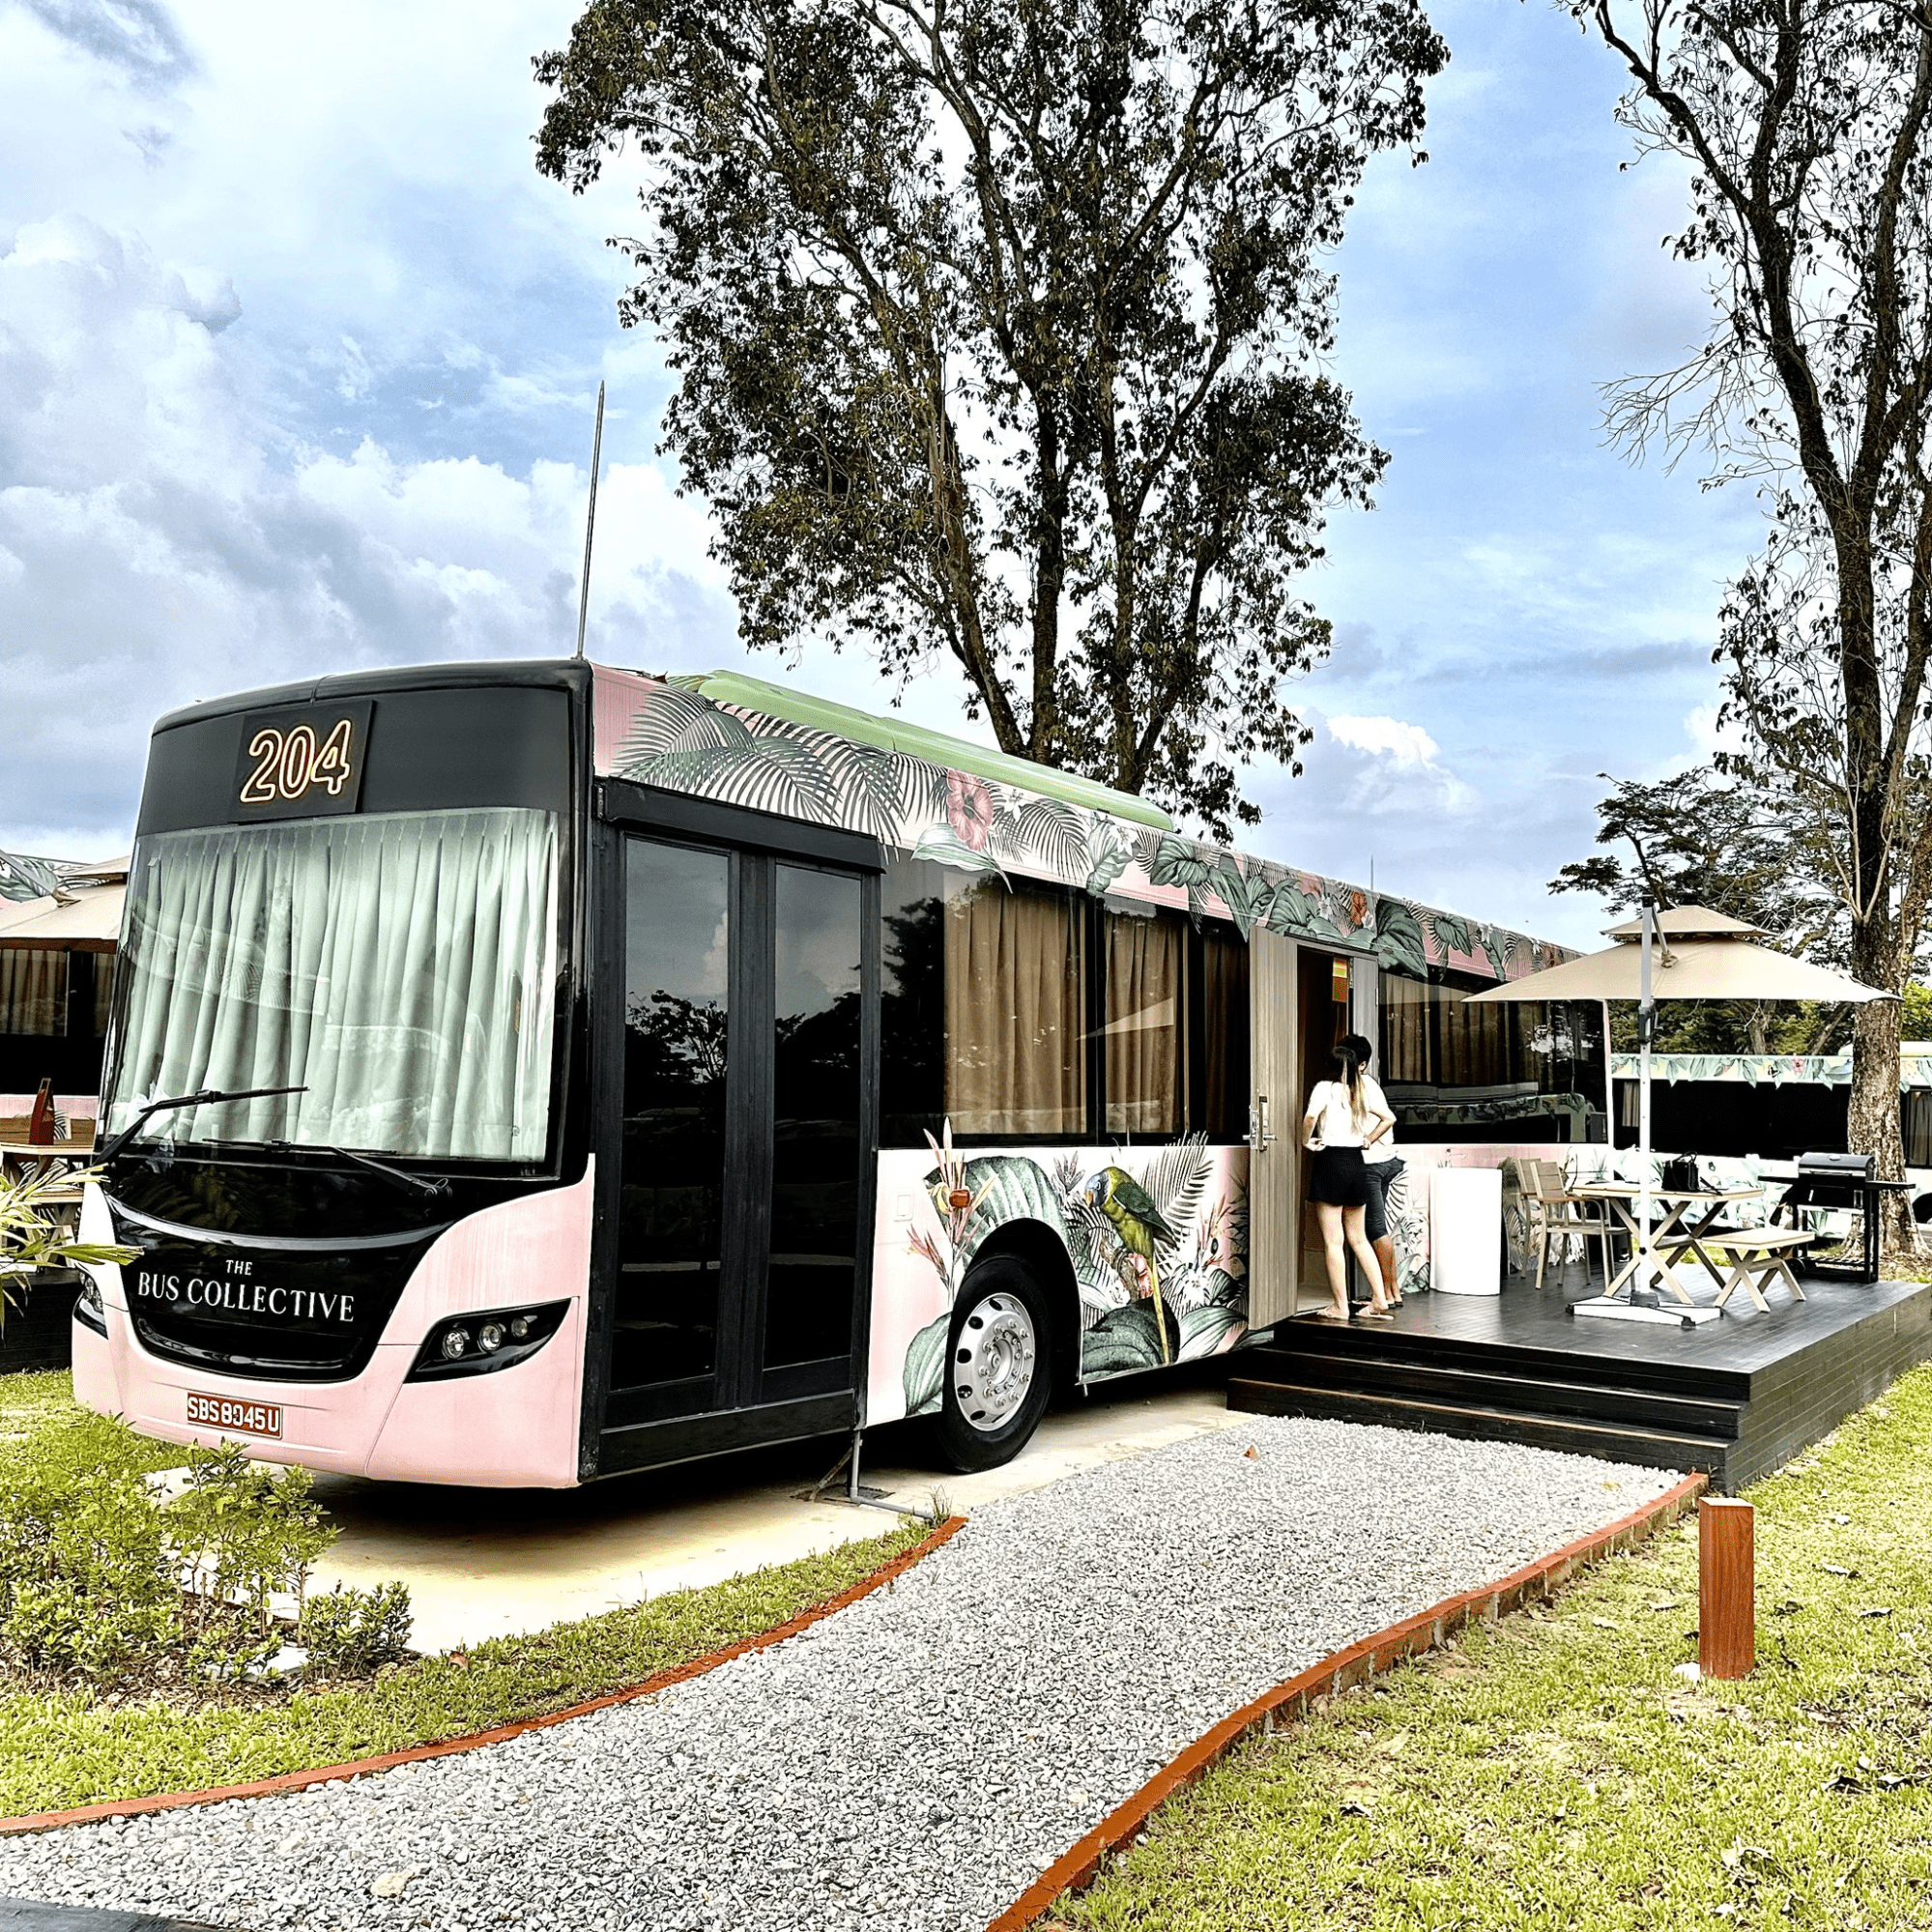 the bus collective hotel